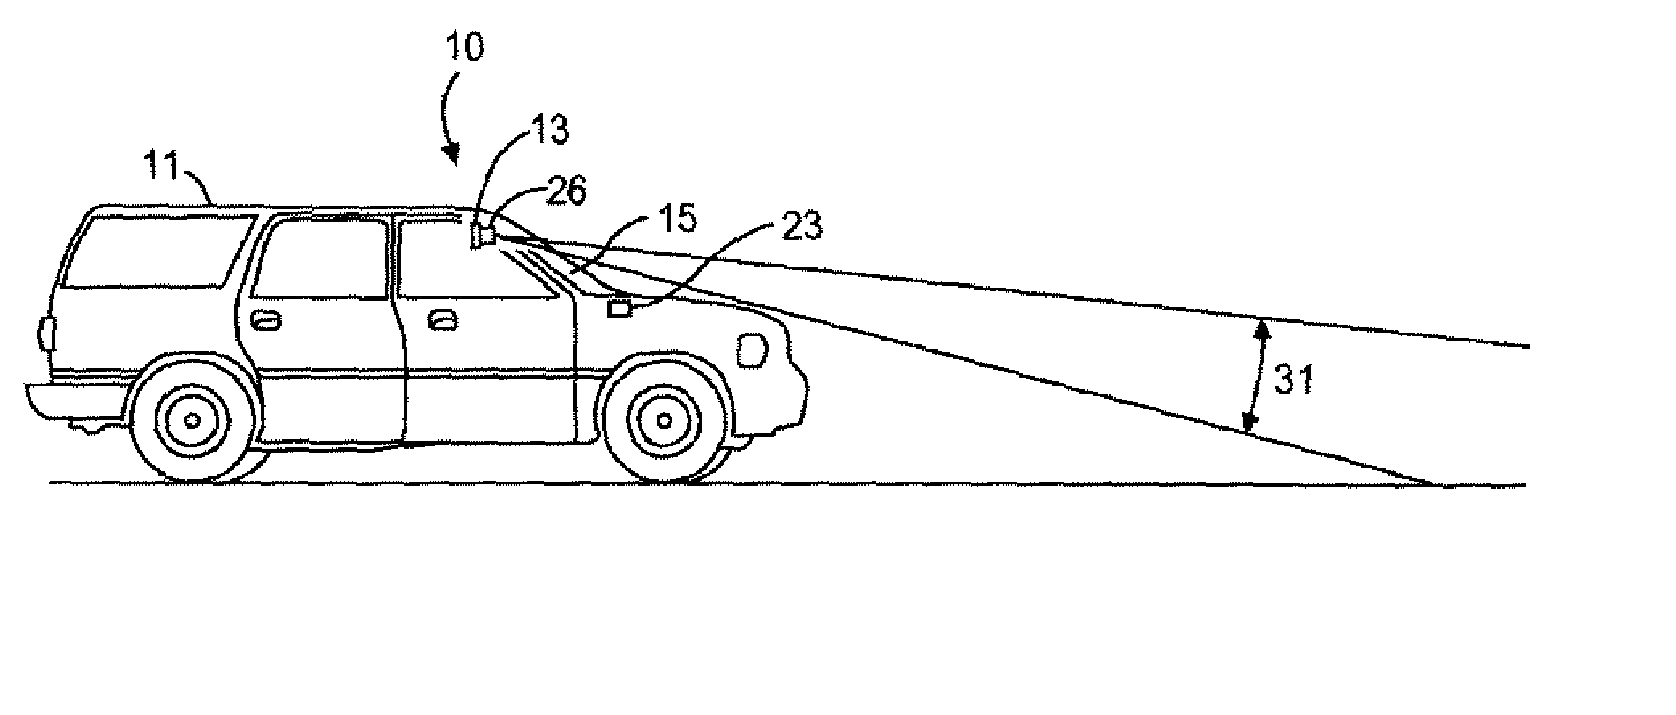 Vehicle imaging processing system and method